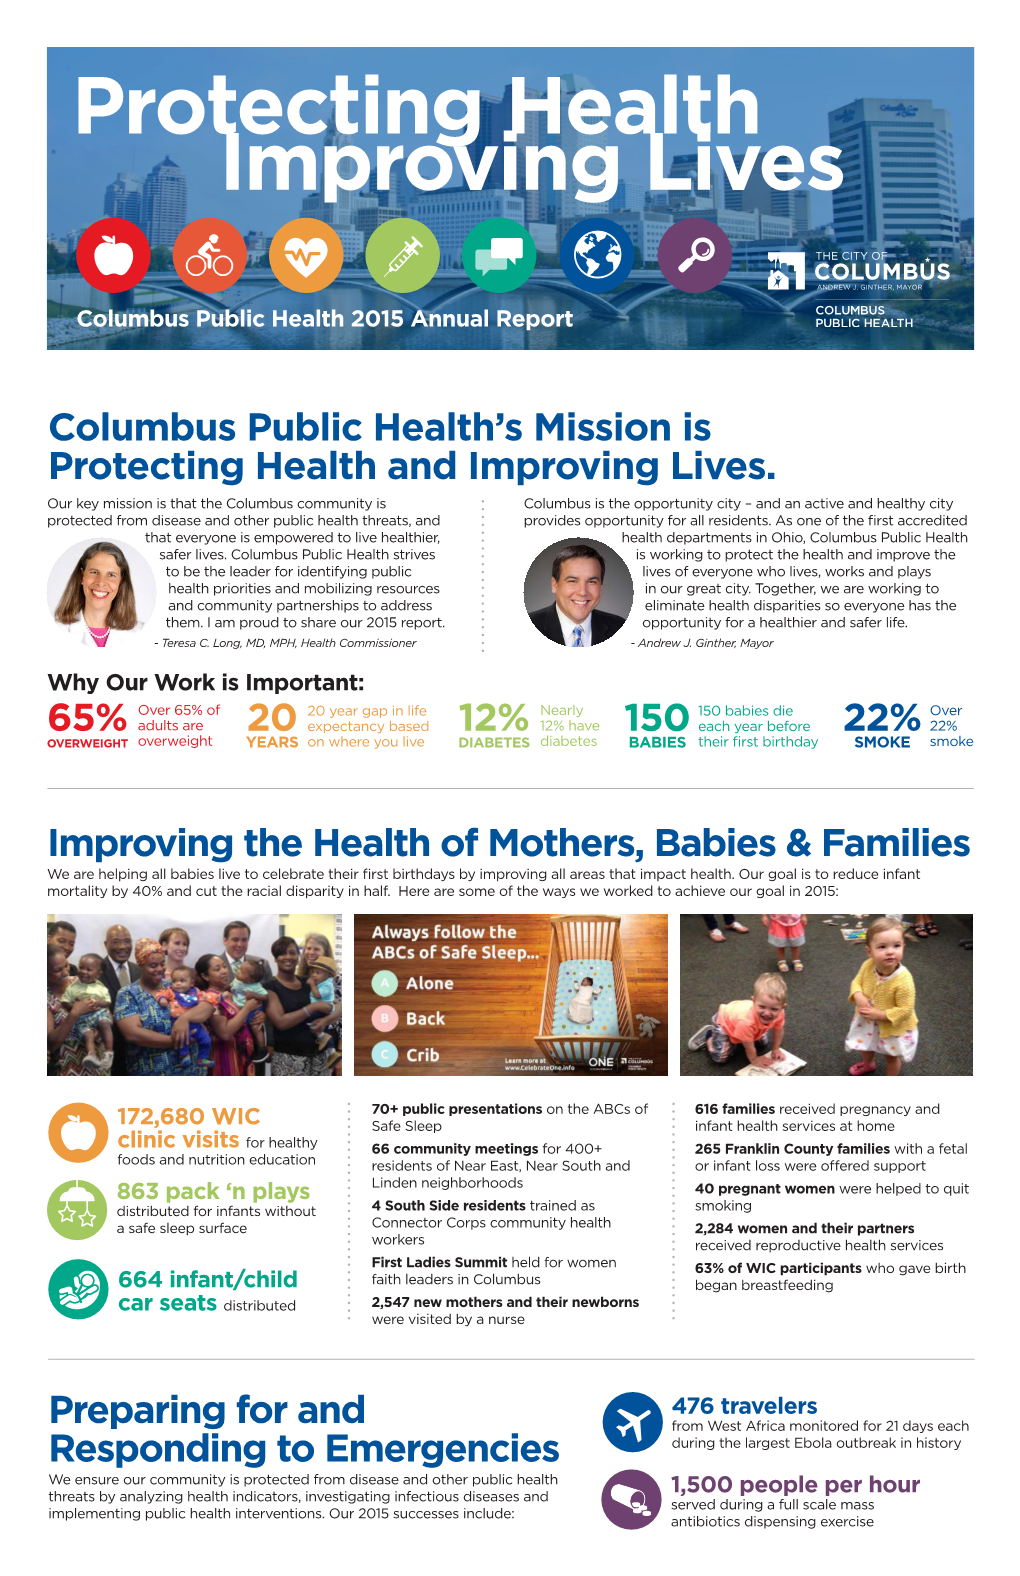 Columbus Public Health's Mission Is Protecting Health and Improving